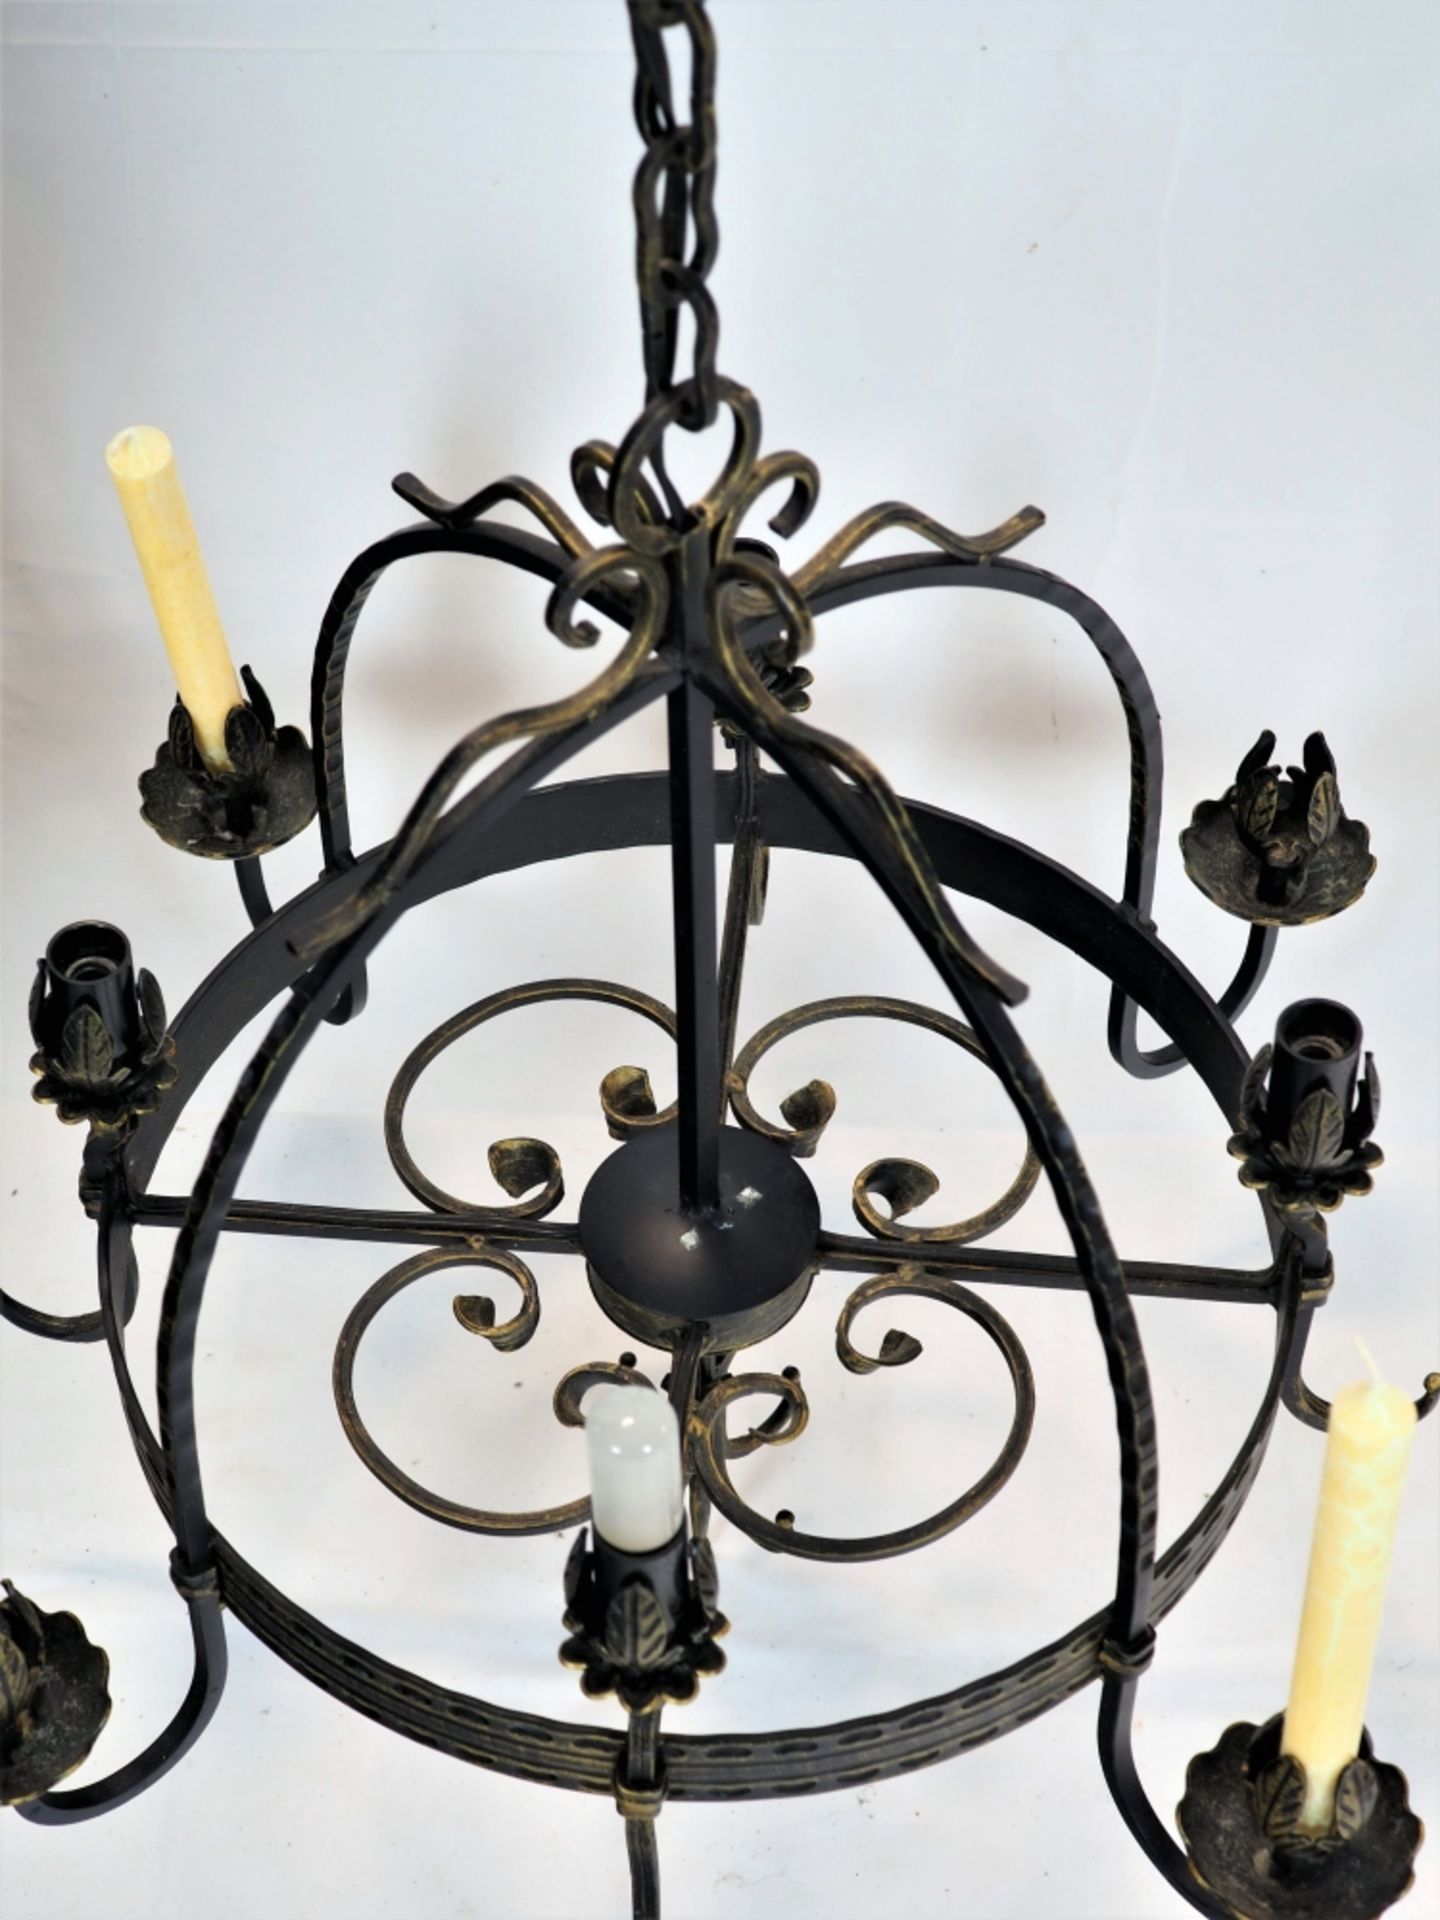 Wrought iron ceiling lamp - Image 2 of 2